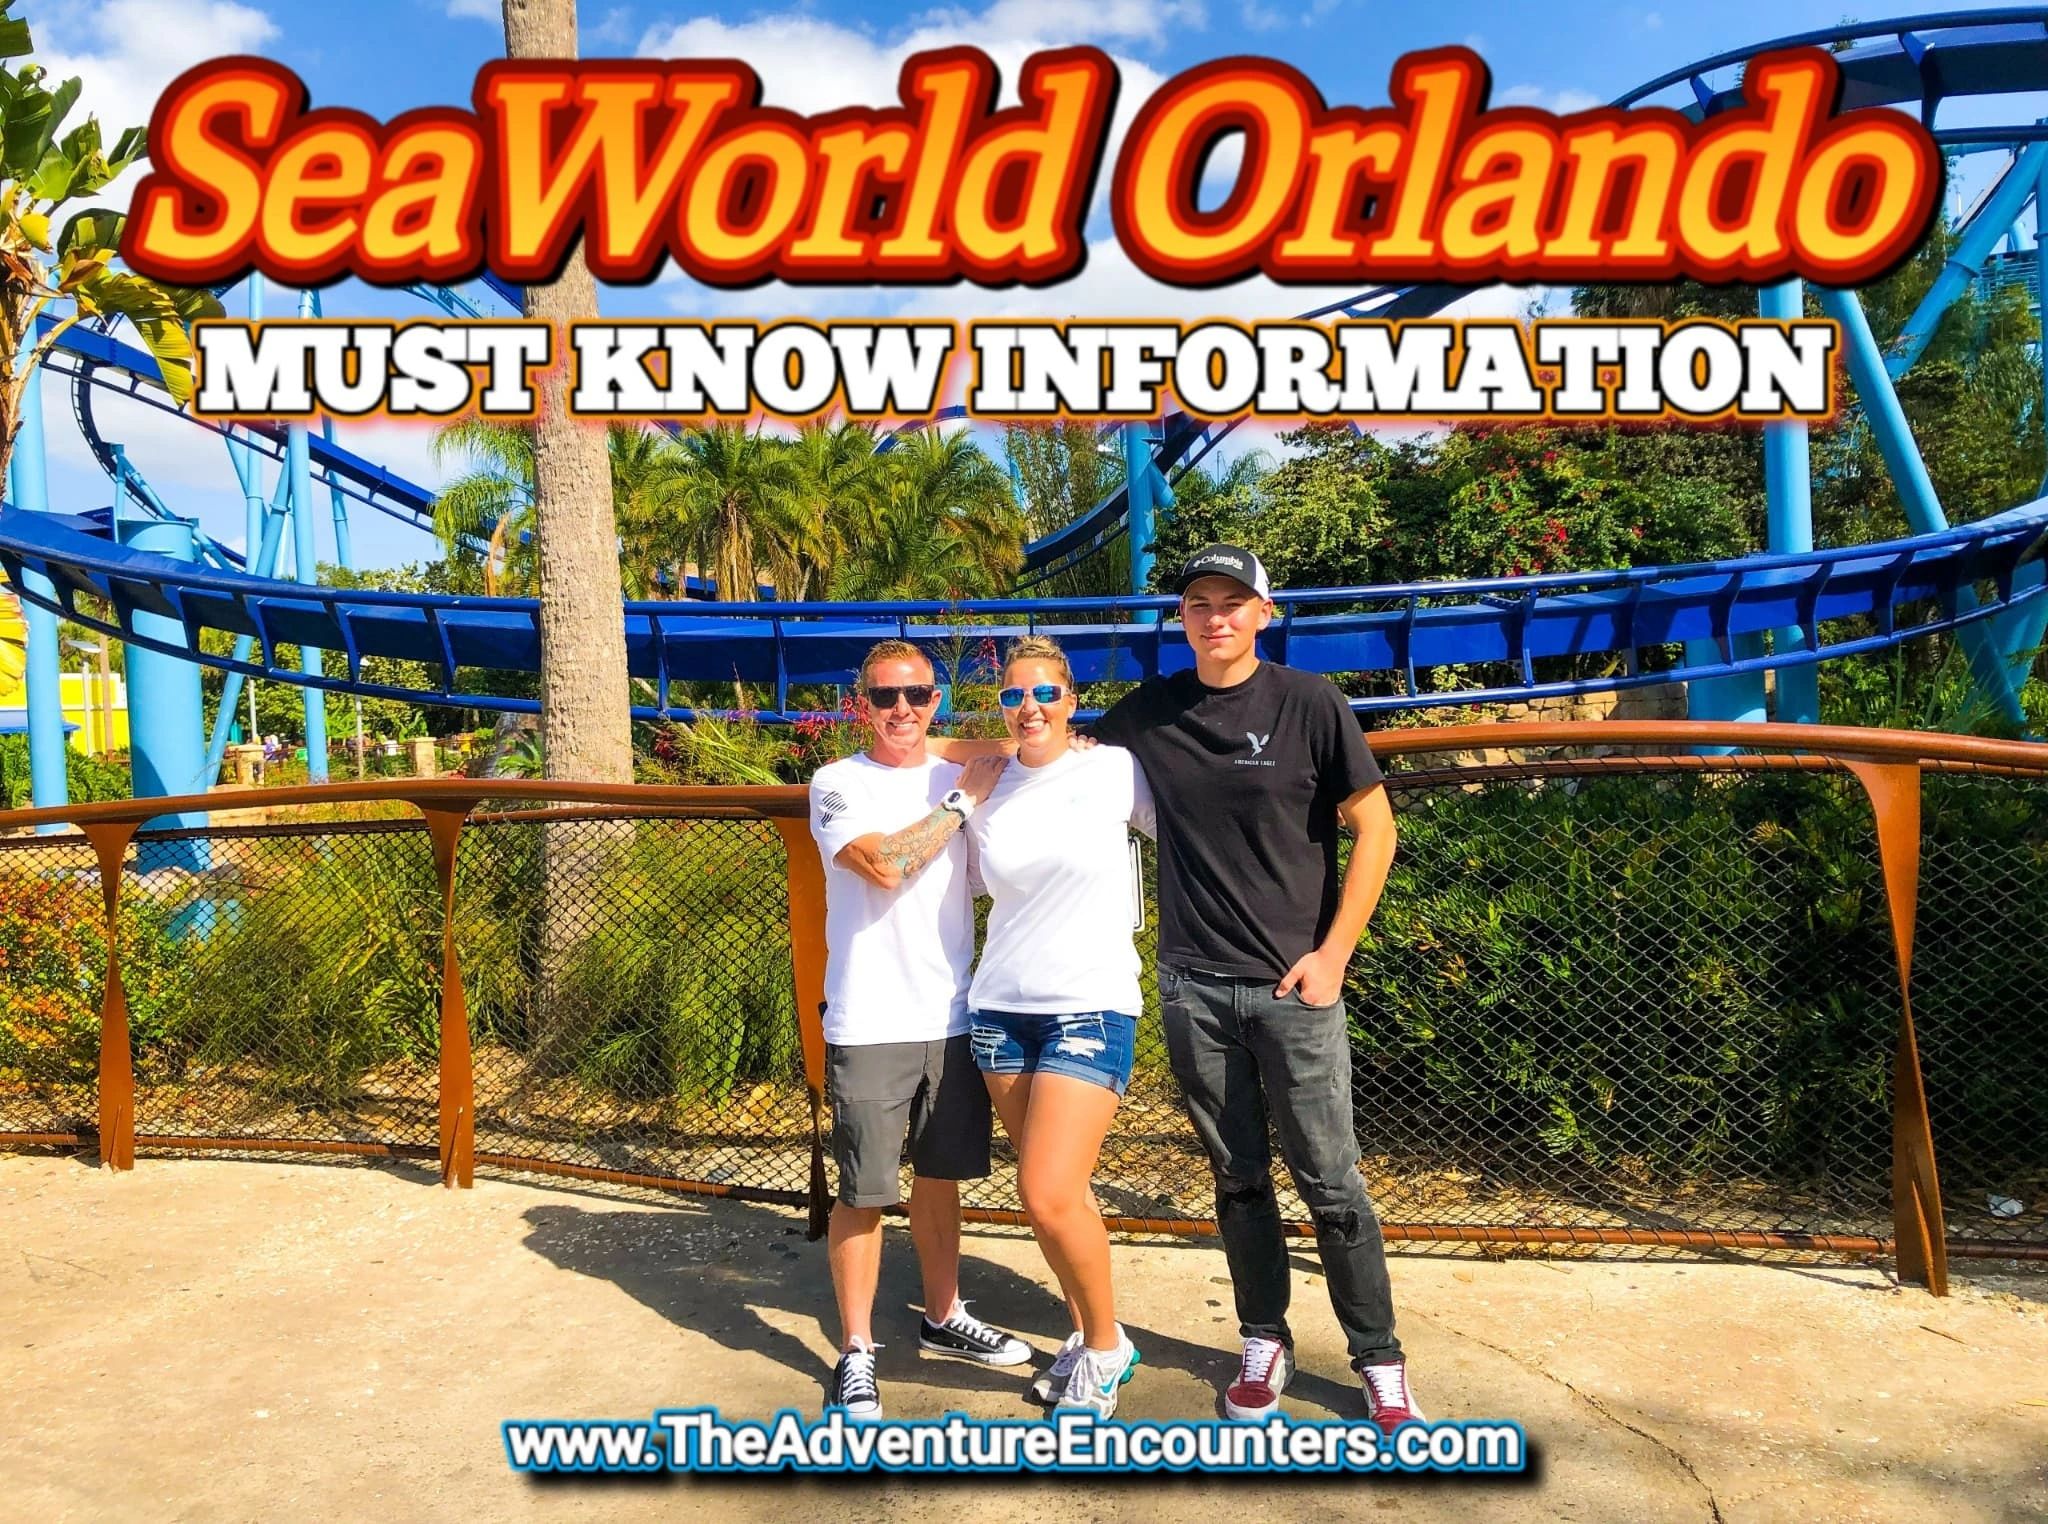 3 people standing in front of a roller coaster at SeaWorld Orlando